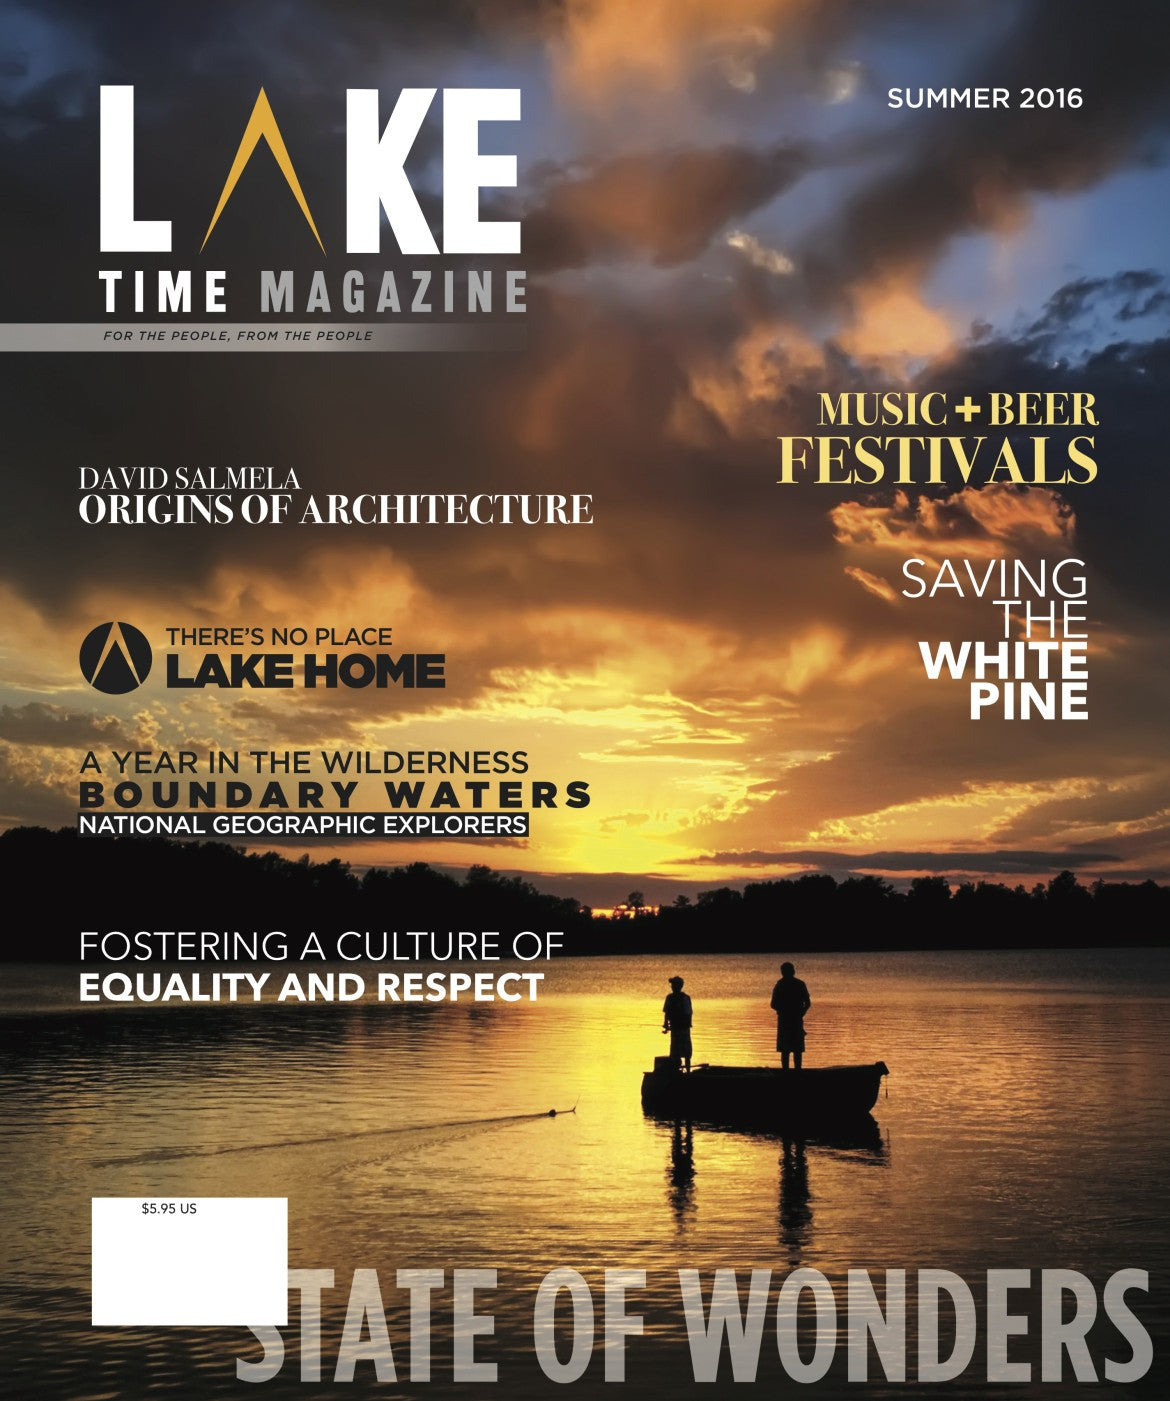 Lake Time Magazine: Issue 4 - The Lake and Company